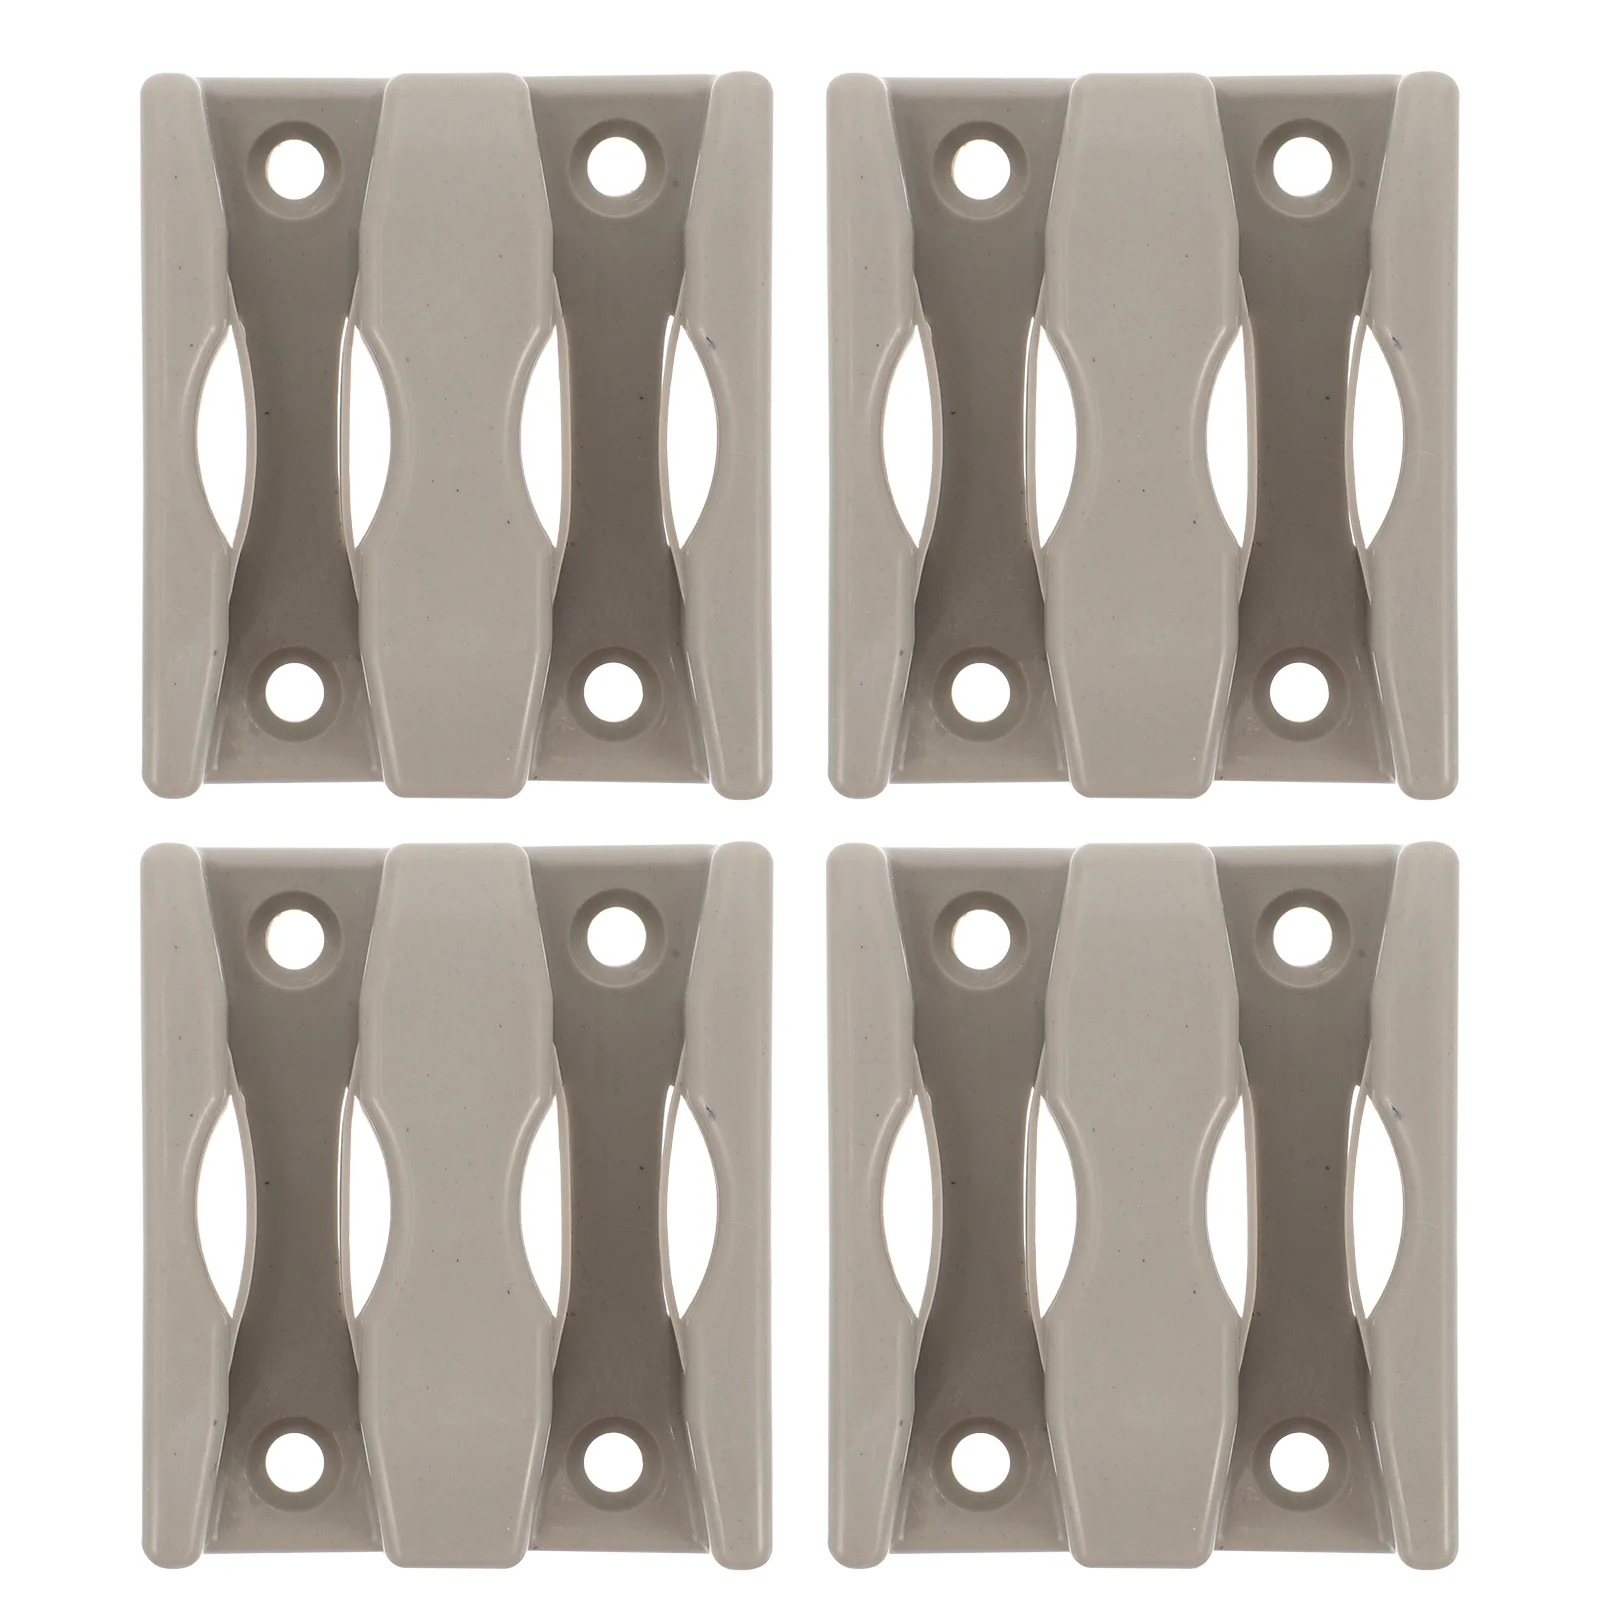 

4 Pcs Glass Door Swing Stopper Sliding Guide Shower Parts Bottom An Fittings Guides Doors Accessories